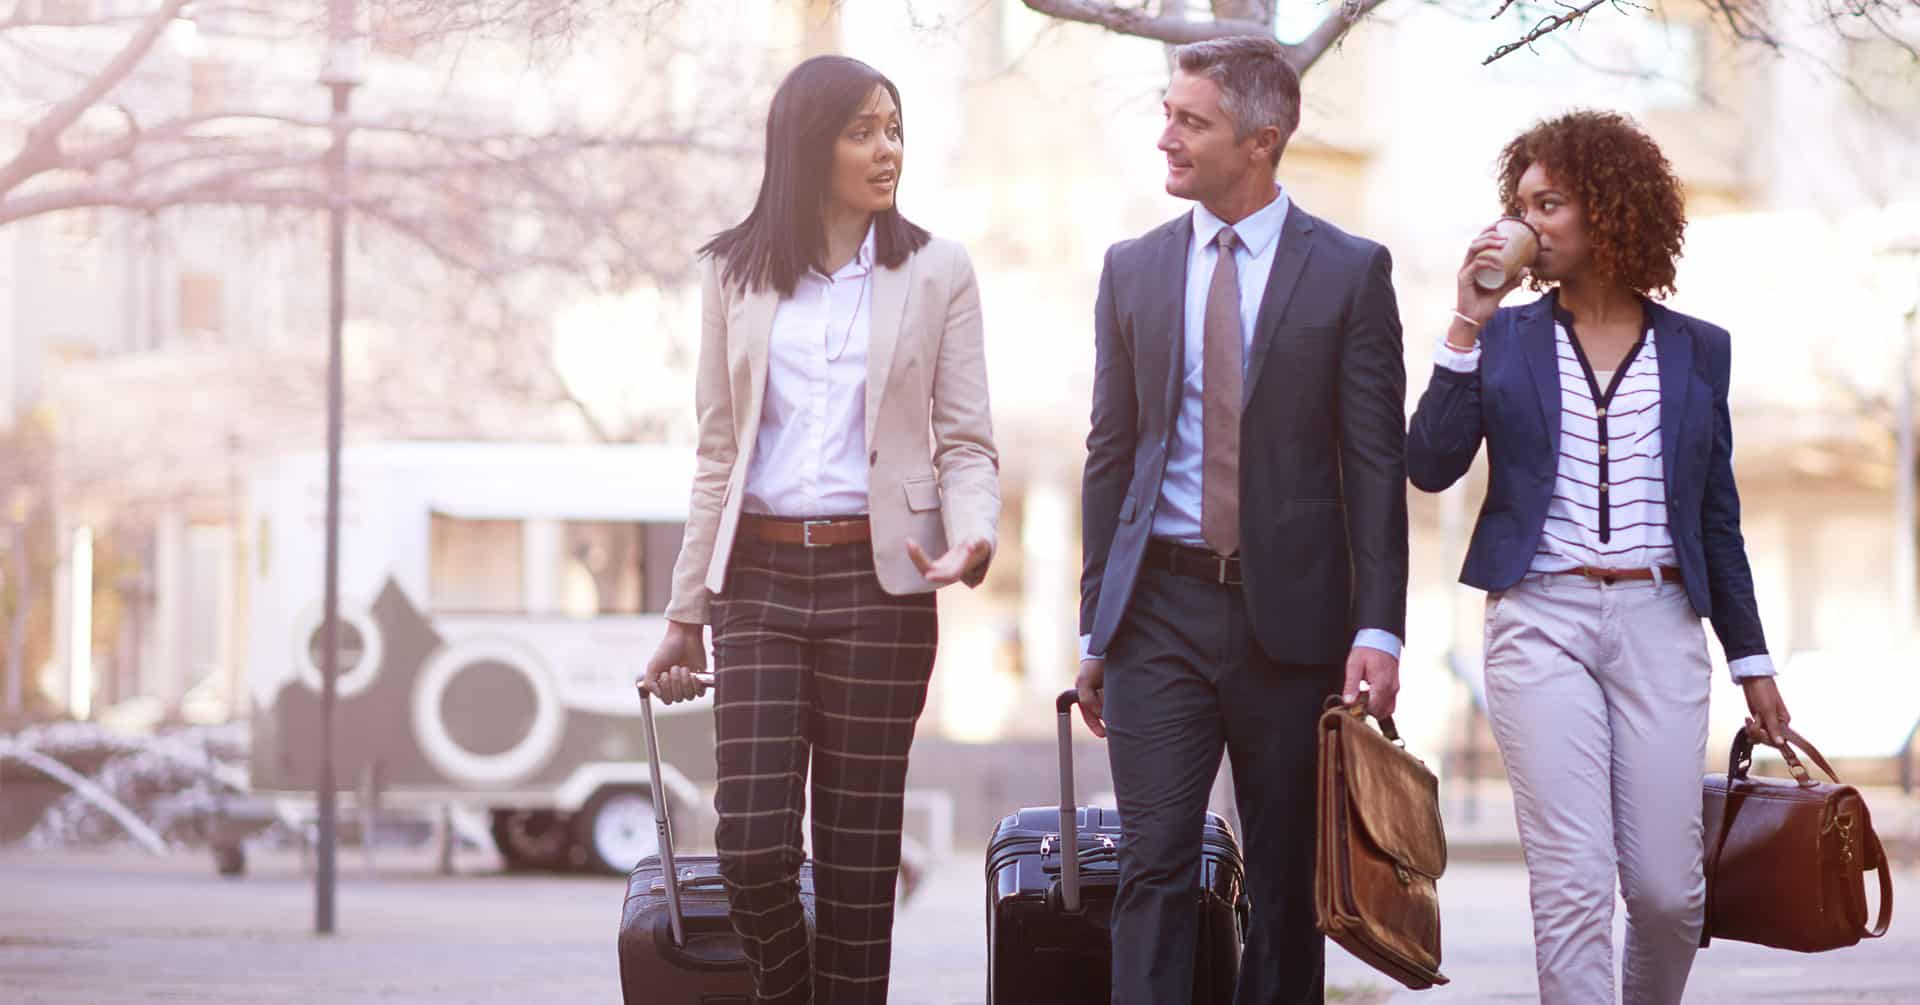 Three business travelers with luggage